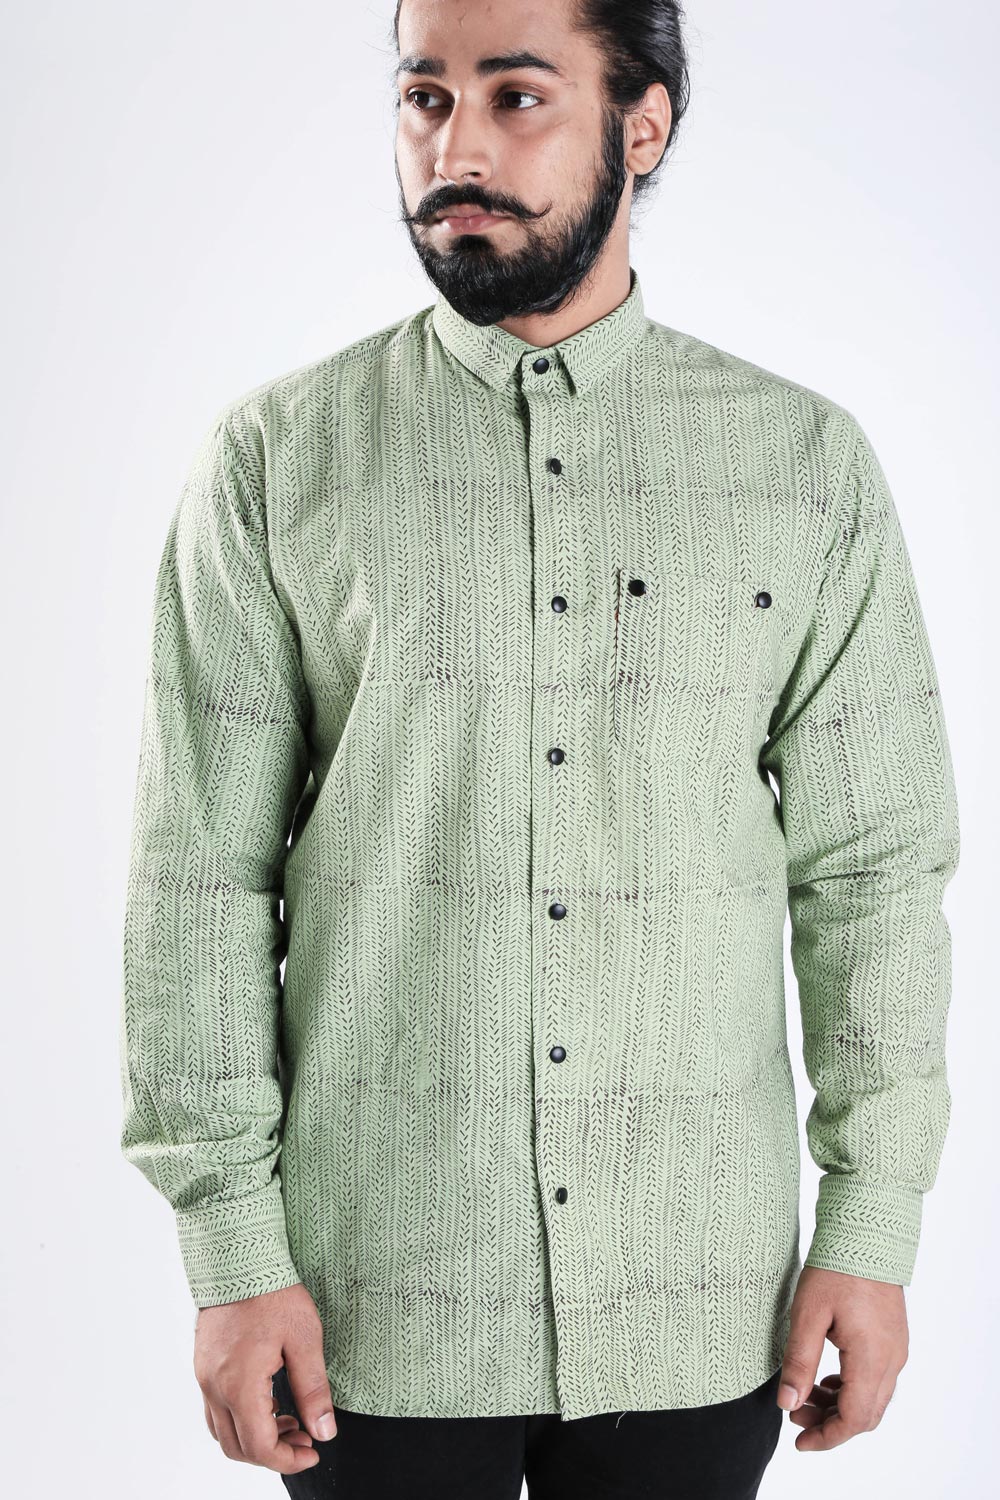 Block Printed Shirt With Contrast Pocket Detail